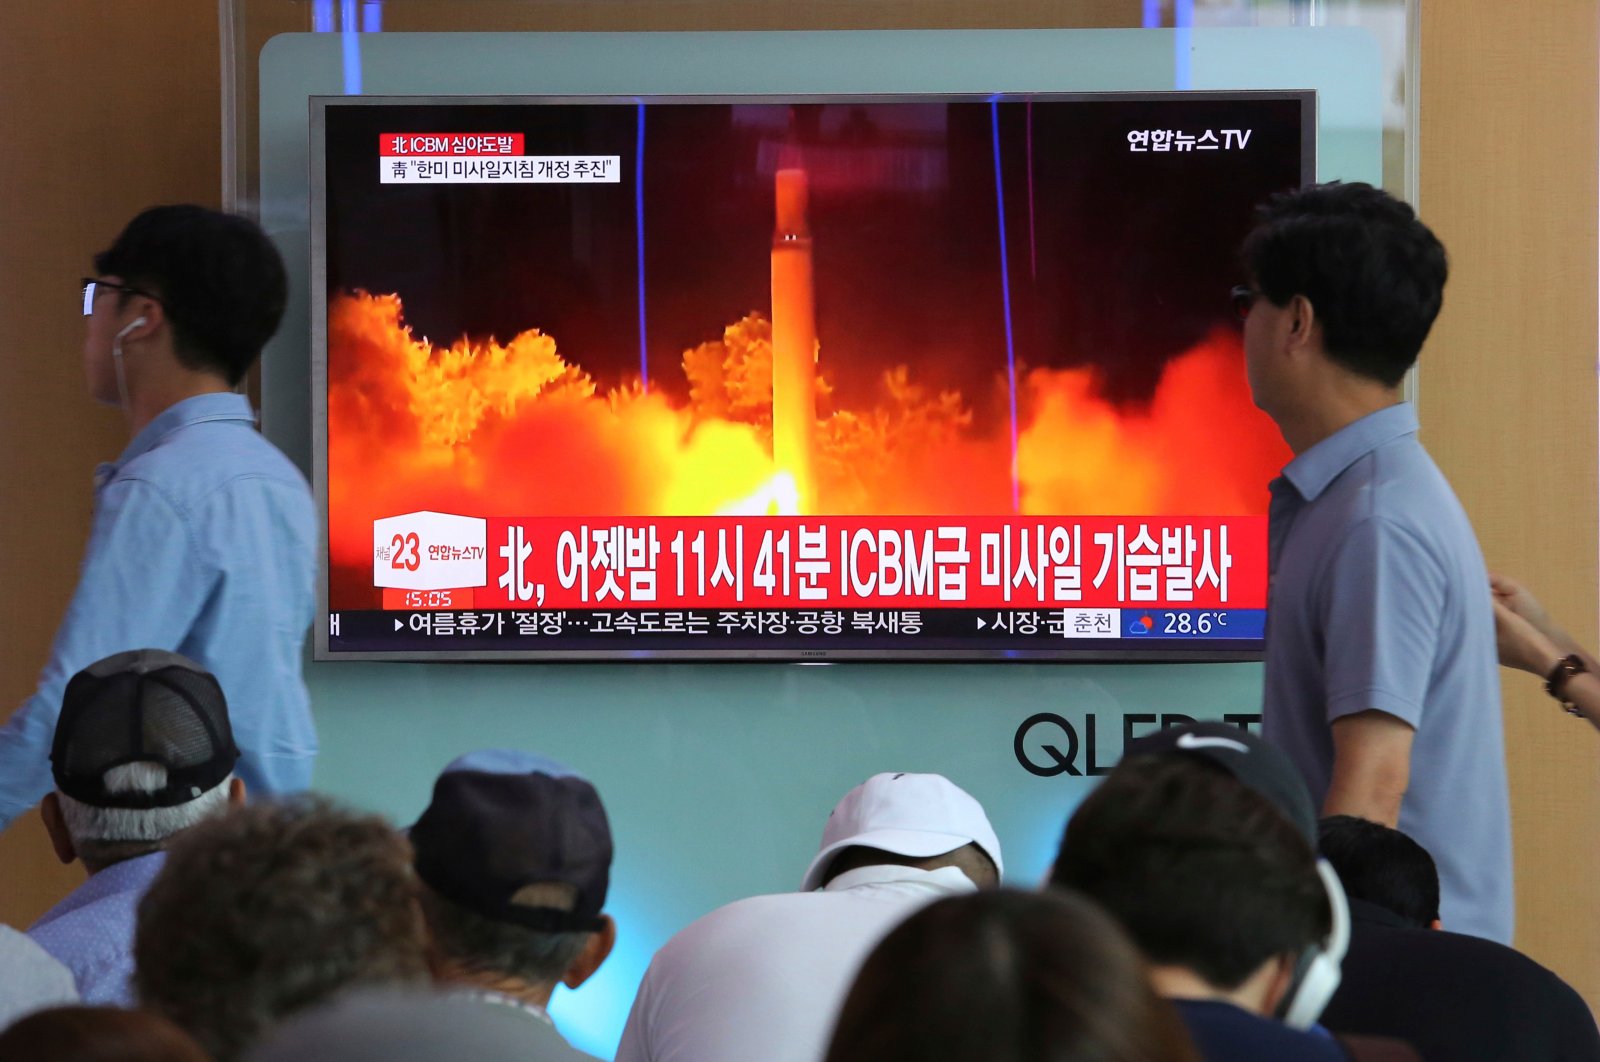 People watch a TV news program showing an image of North Korea's latest test launch of an intercontinental ballistic missile (ICBM), at the Seoul Railway Station in Seoul, South Korea, July 29, 2017. (AP Photo)